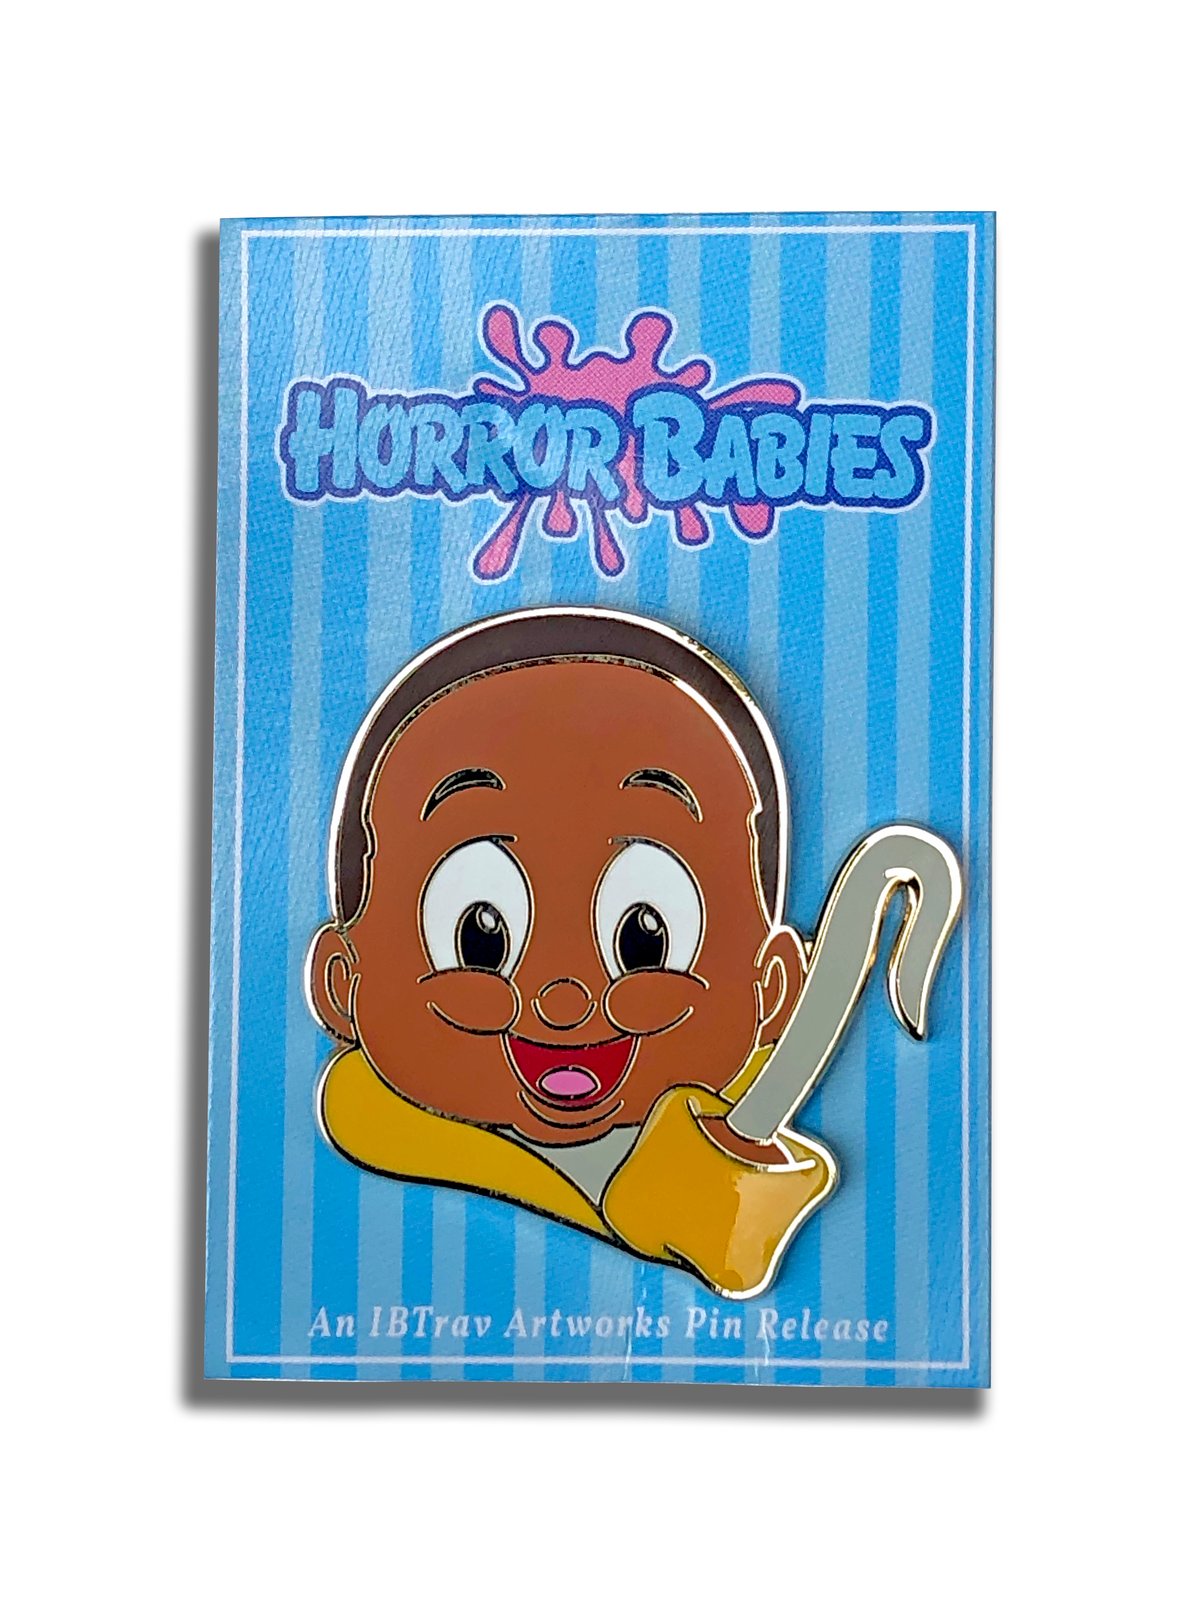 Horror Babies 1.75" "Candy Baby" Limited Edition Enamel Pin